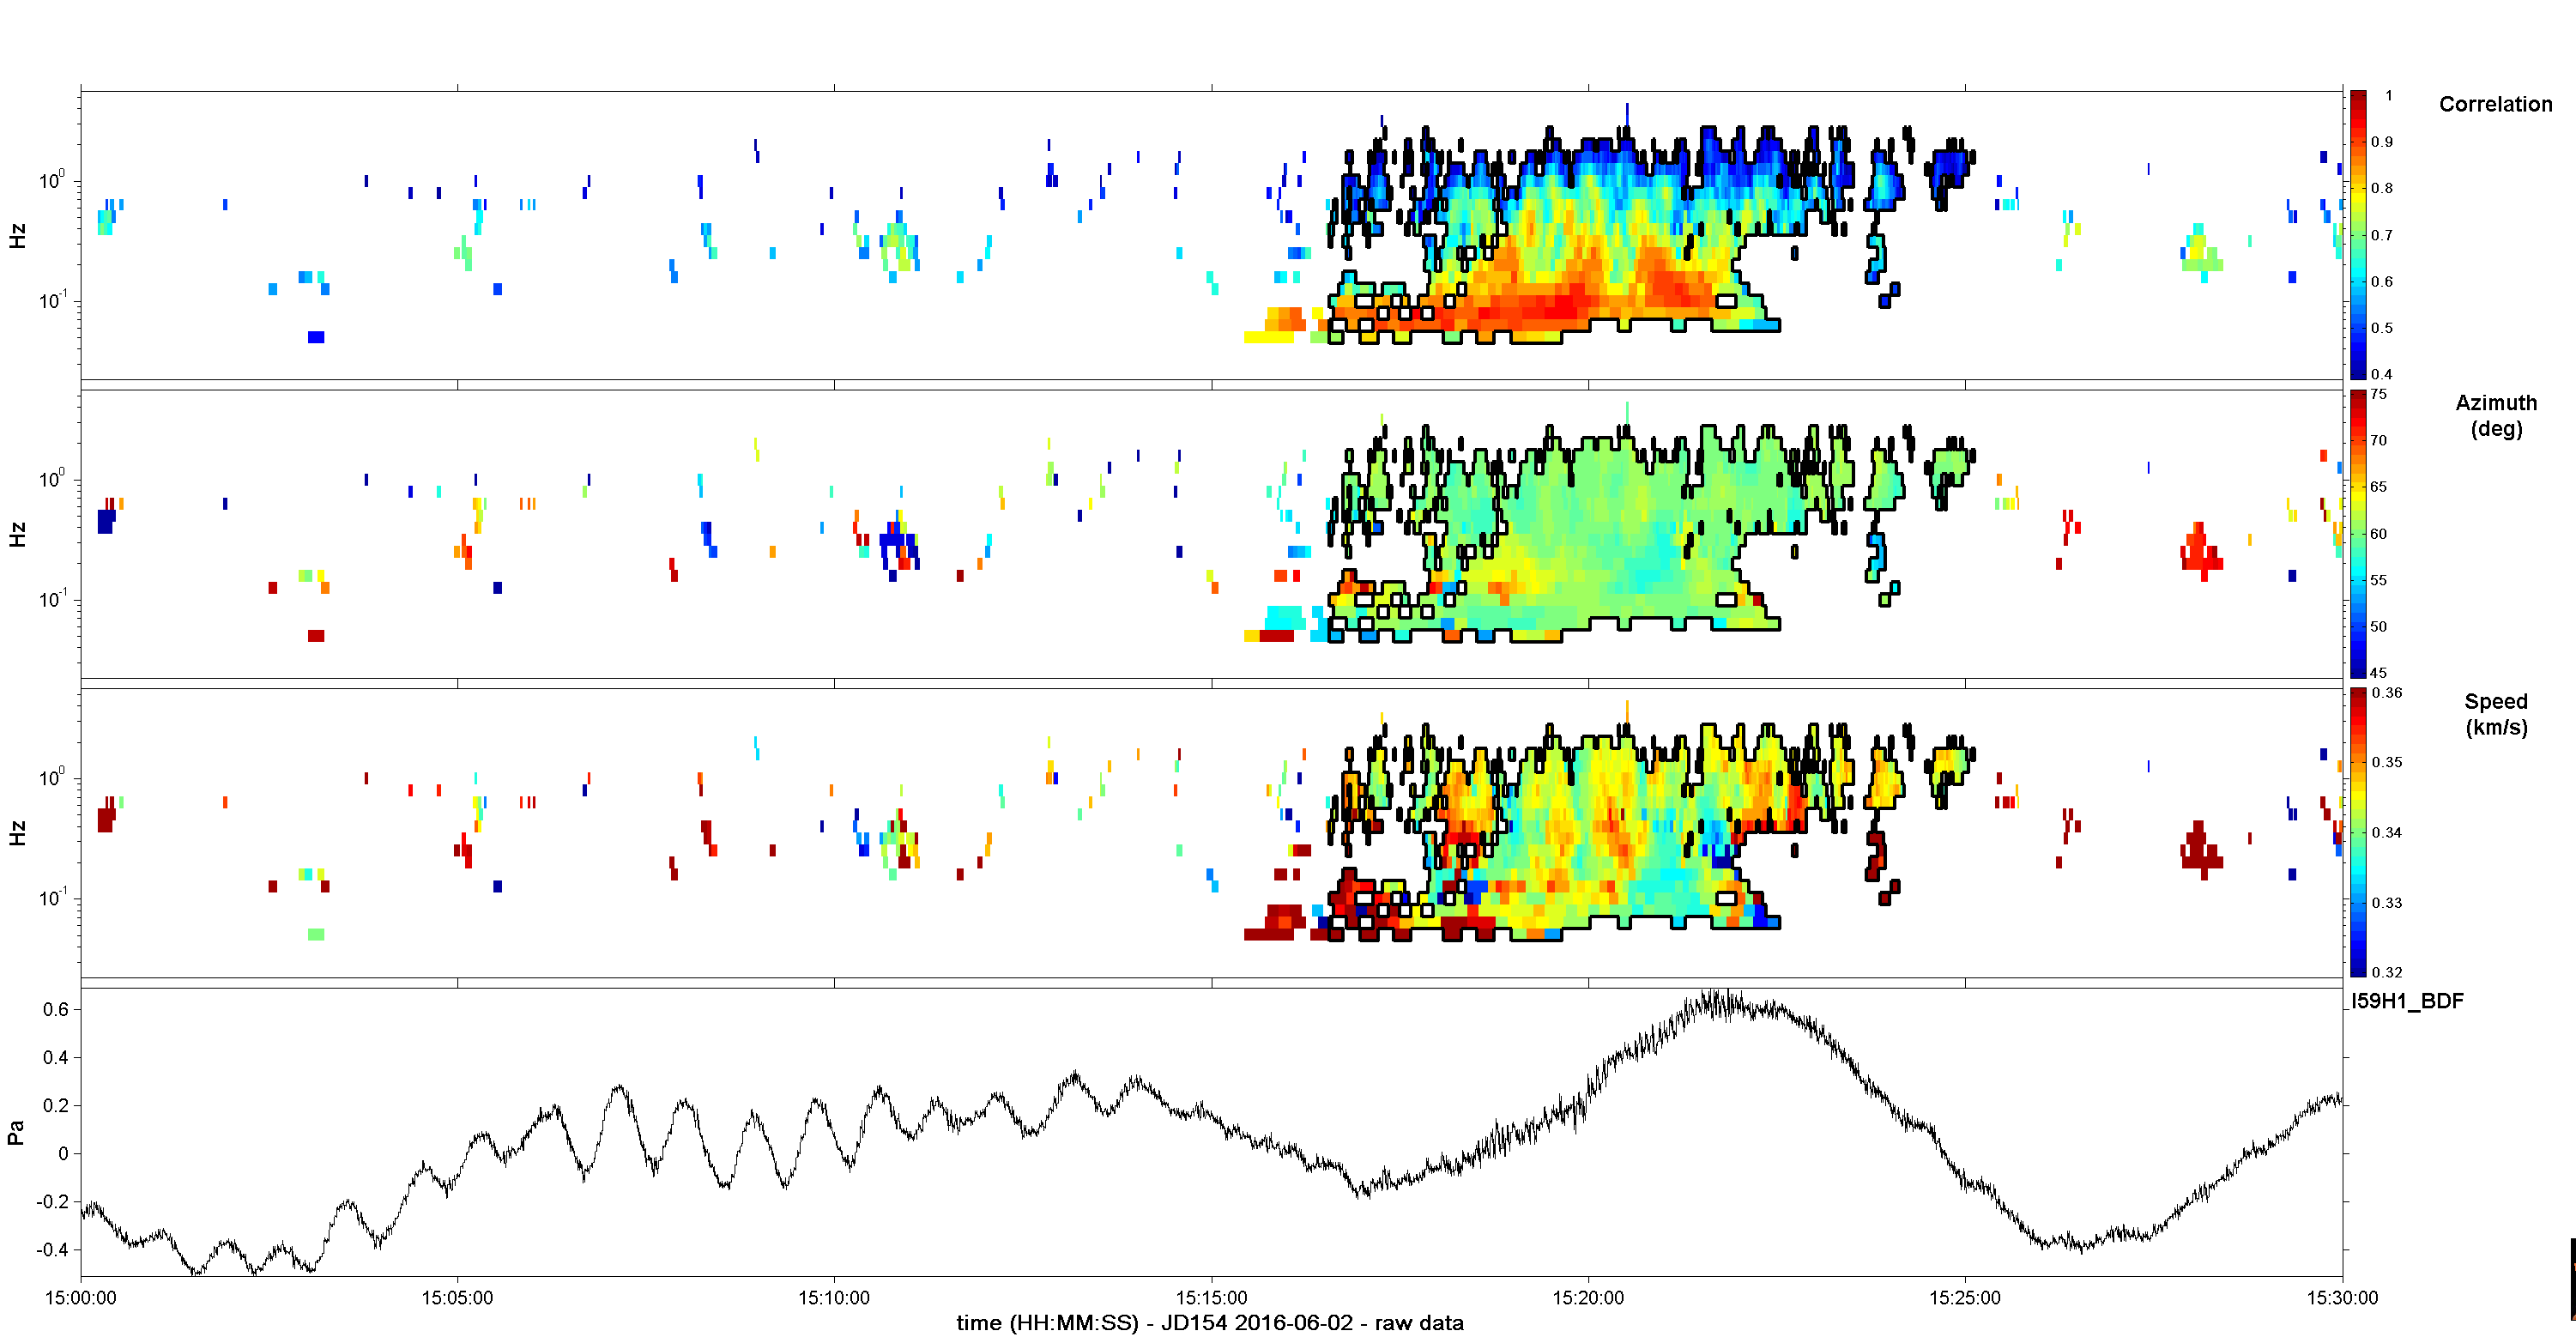 Figure 10: Manual array processing results for the station I59US with a MG2 and 24, 1/3 octave bands from 0.0315-5 Hz. These detections attributed to the signal of interest have apparent acoustic velocities, a moderate correlation, near expected back-azimuth. The azimuth is further analyzed in Figure 11. 